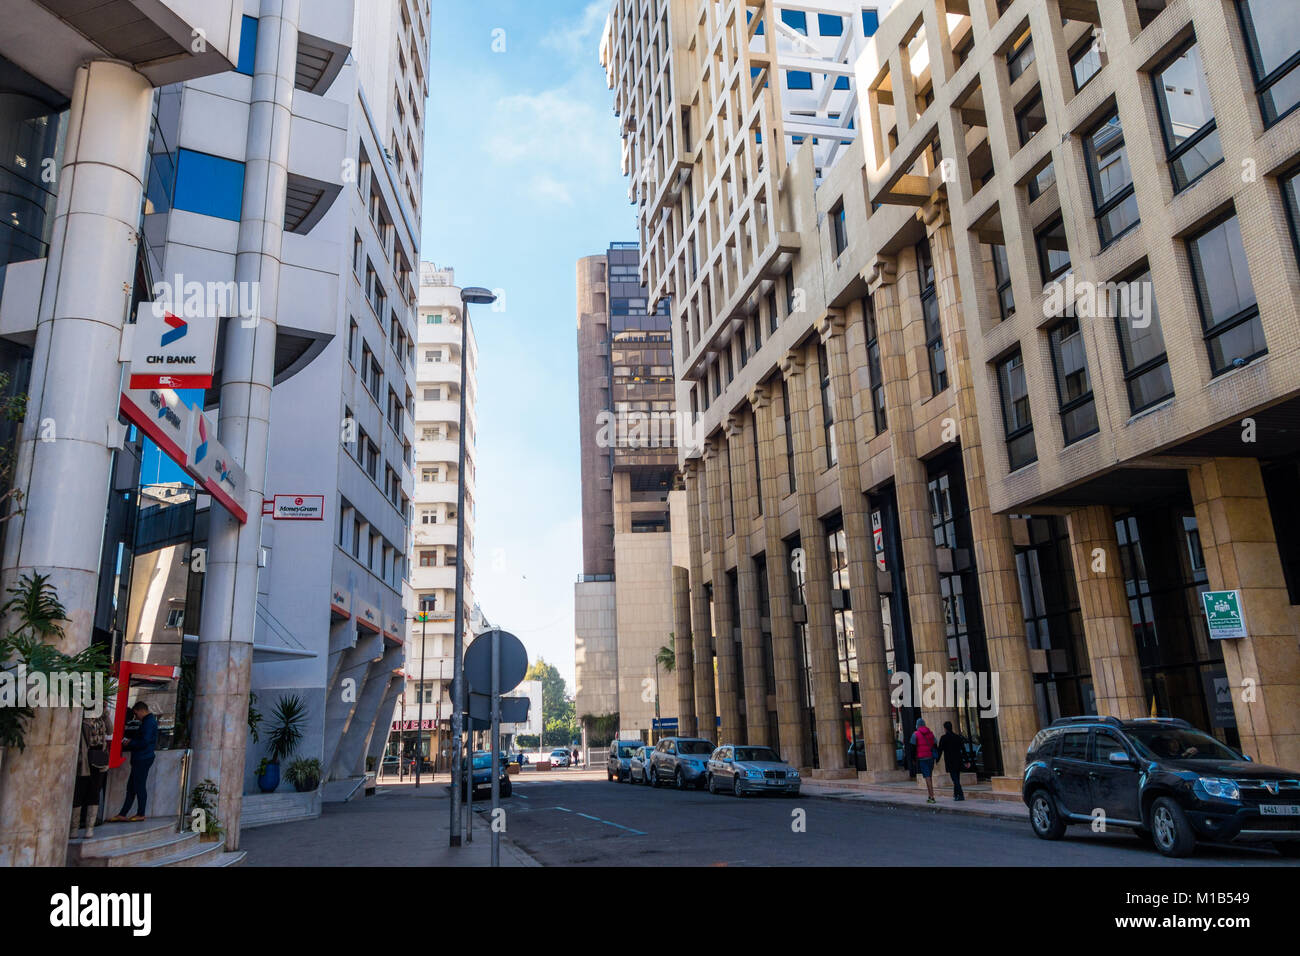 Casablanca, Morocco - 21 January 2018 : low angle view of CIH bank building and others in the financial district Stock Photo